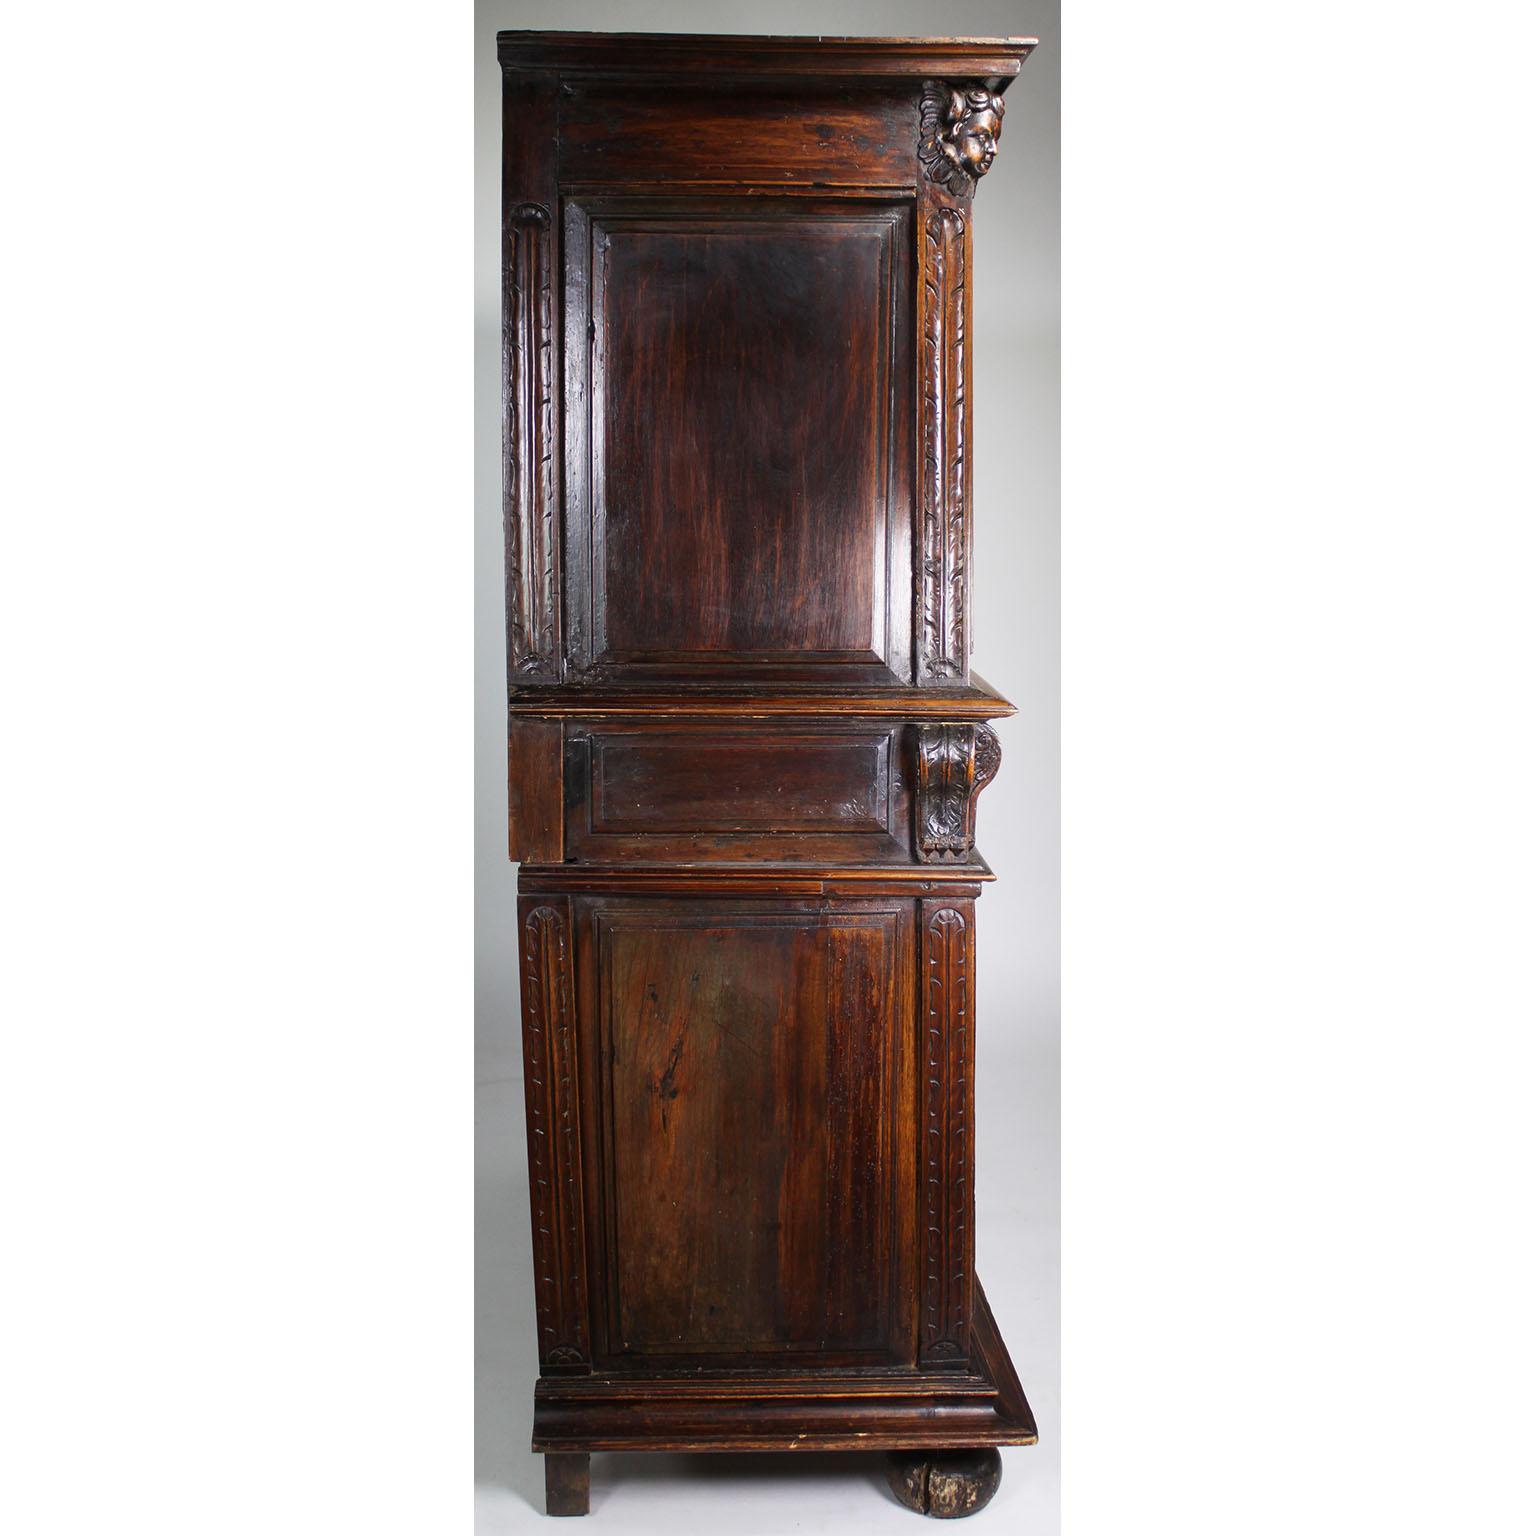 A 17th-18th Century French/Italian Renaissance Walnut Carved Credenza Cabinet For Sale 6